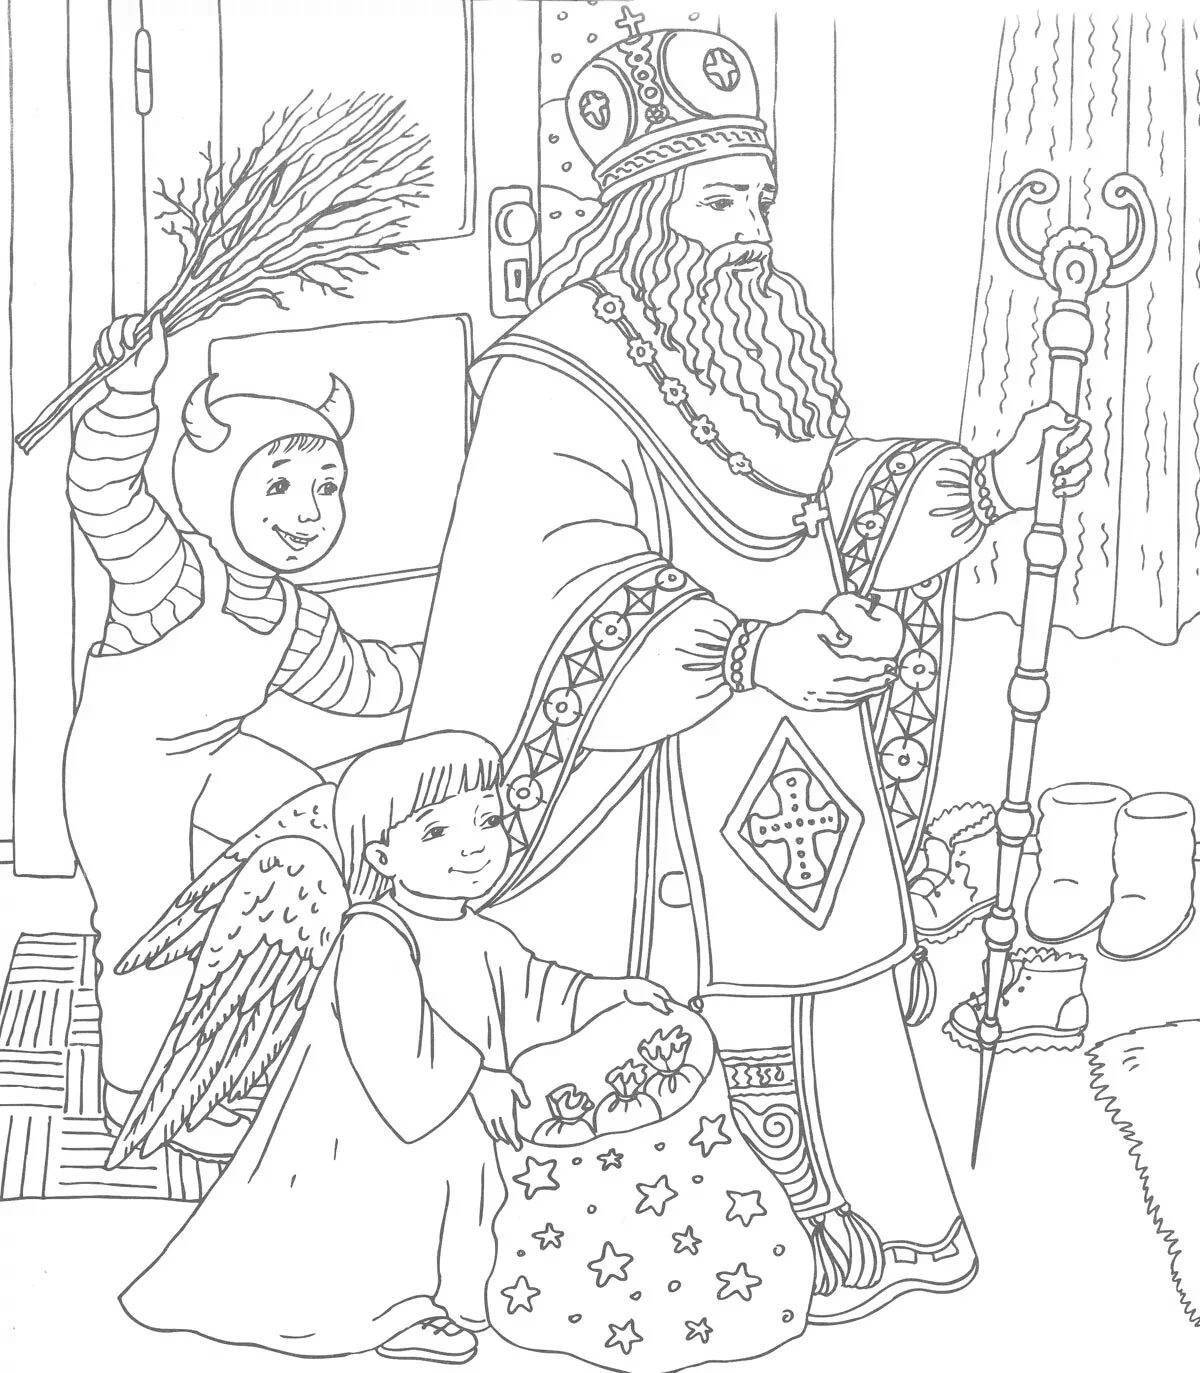 Exciting carol coloring pages for kids 6 7